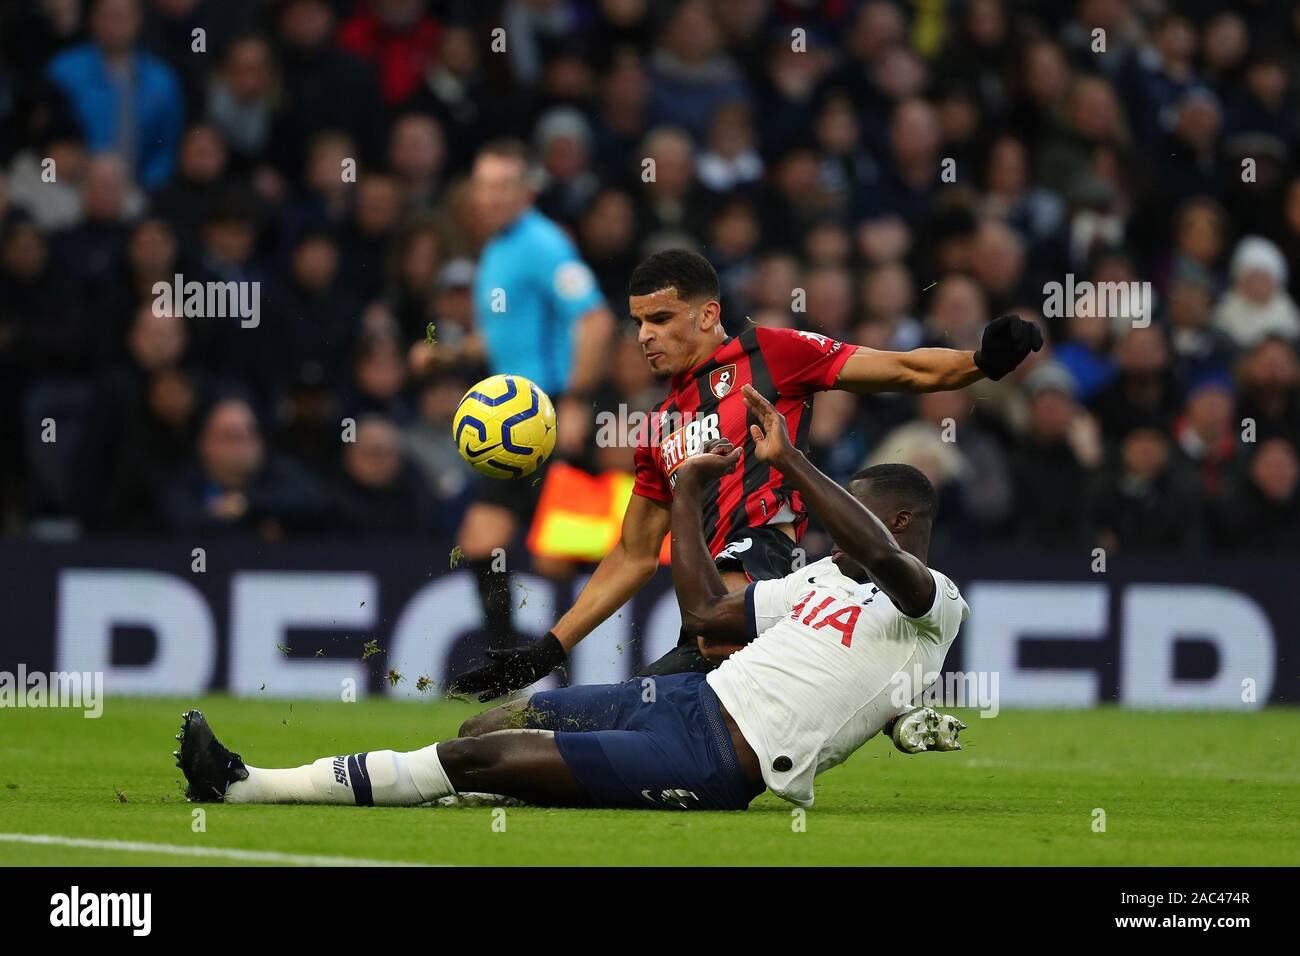 Bournemouth's forward Dominic Solanke and Tottenham's defender Davinson Sanchez compete for the ball during the Barclays Premier League match between Tottenham Hotspur and Bournemouth at the Tottenham Hotspur Stadium, London, England. On the 30th November 2019. (Photo by AFS/Espa-Images) Stock Photo